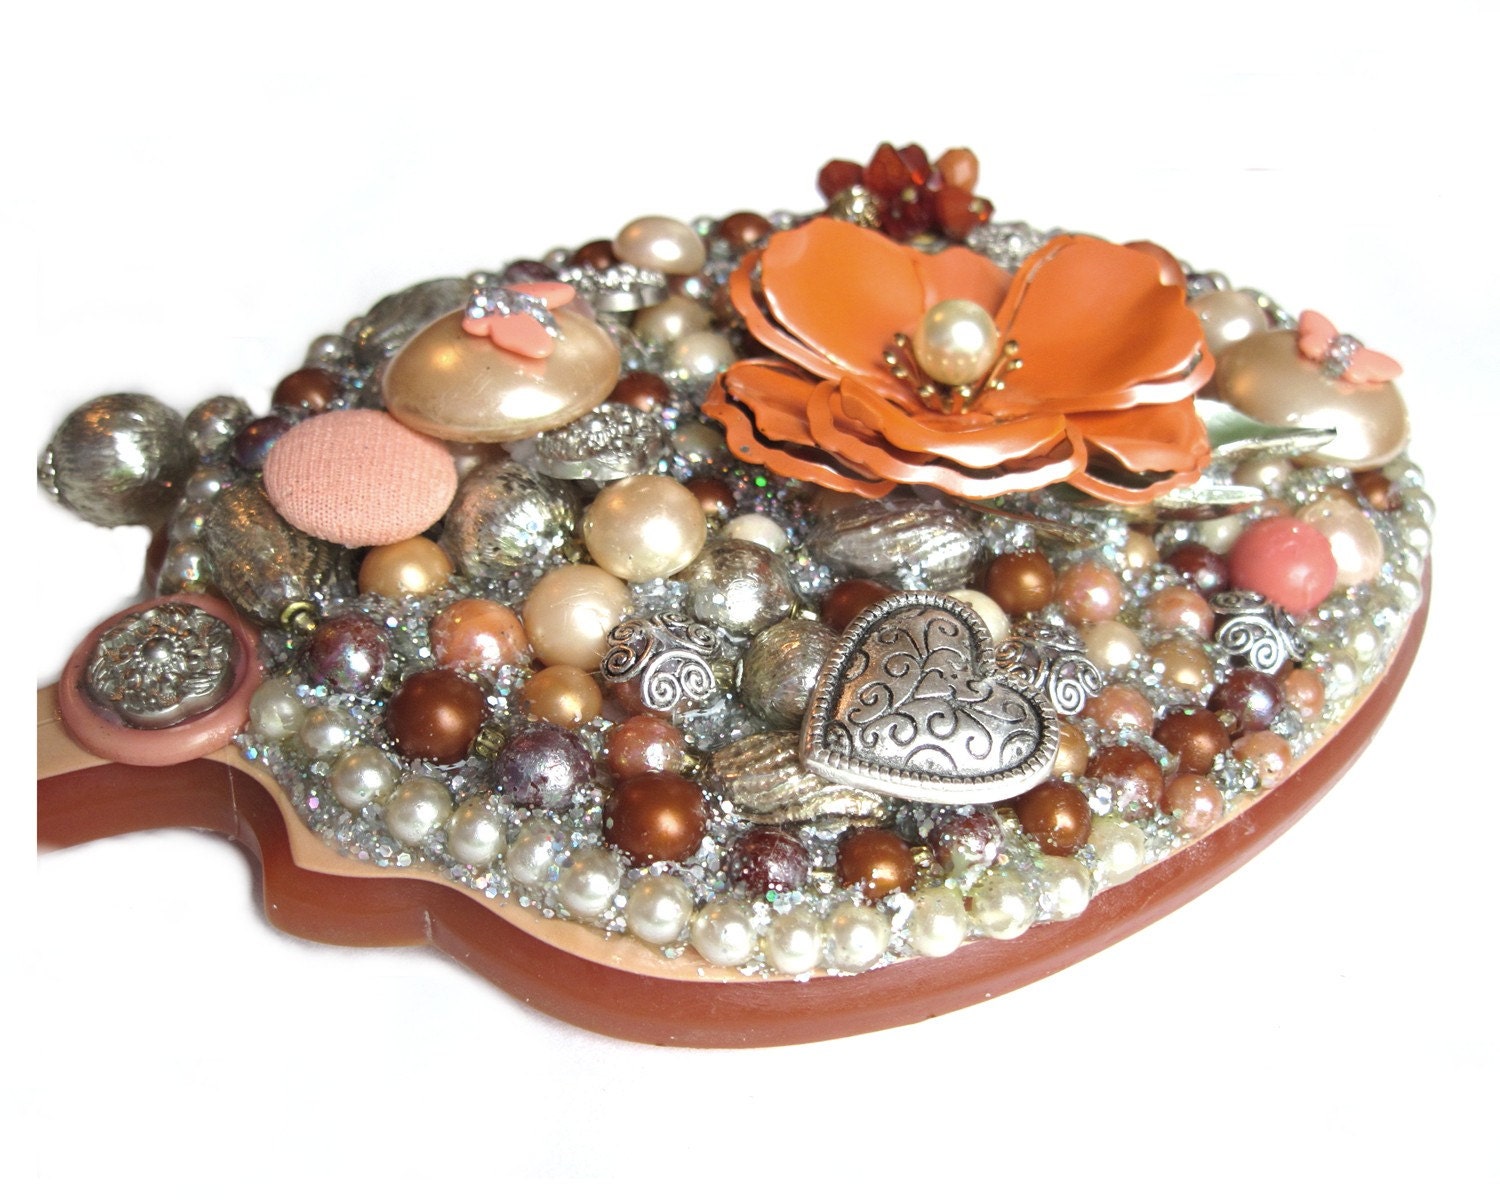 Hand Mirror, Decorative Jeweled Art Mirror, Radiant Reflections, Lustrous Mirror, Peach Blossom Floating In a Sea Of Silvery Pearls